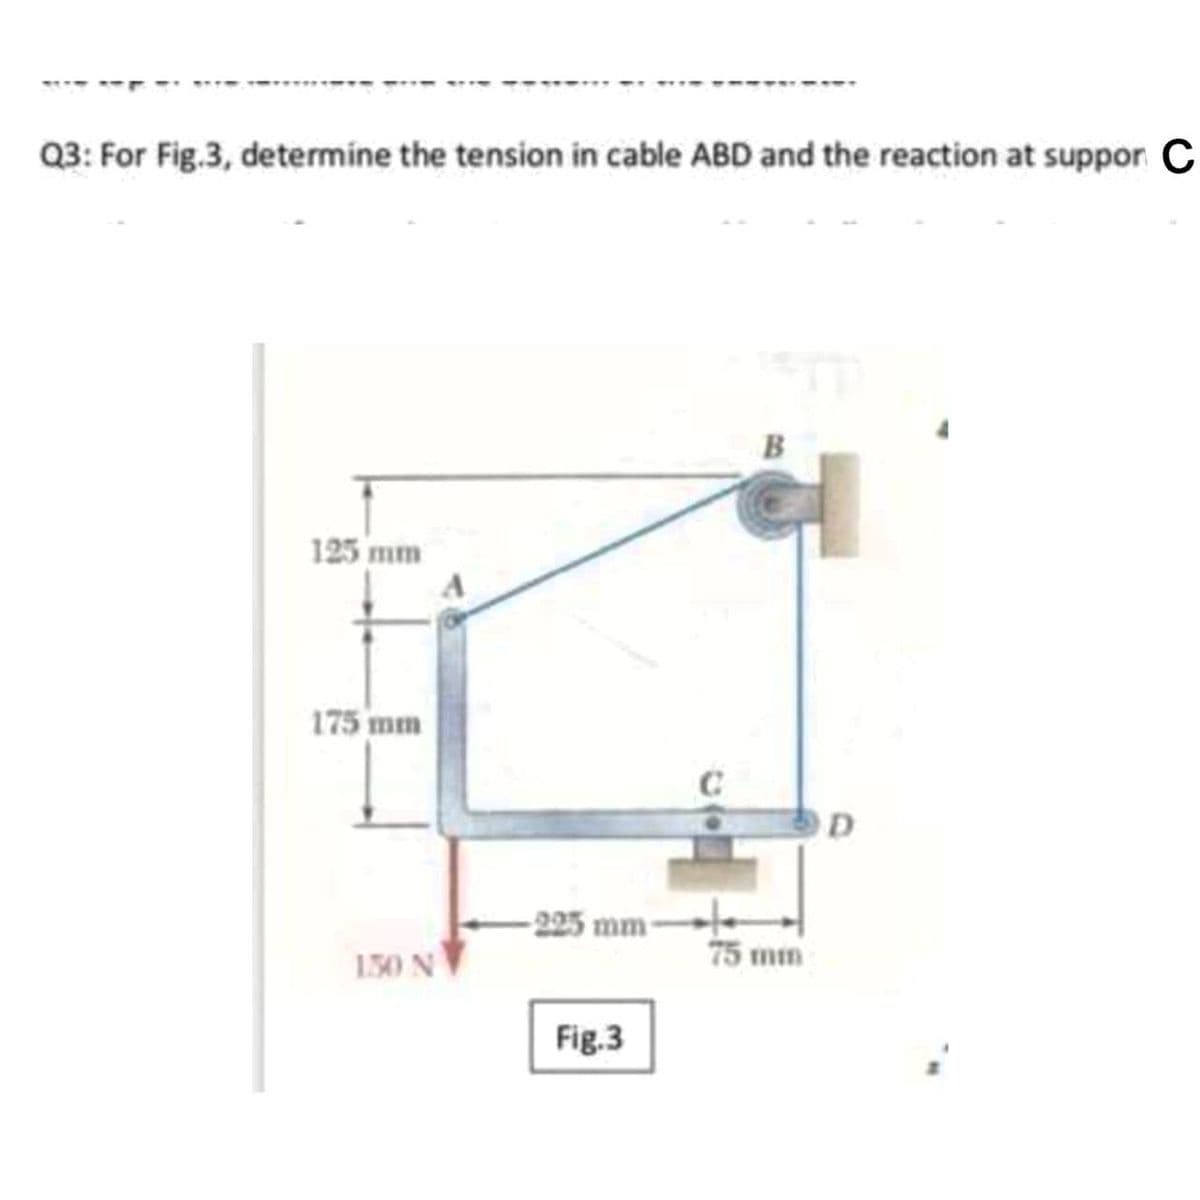 Q3: For Fig.3, determine the tension in cable ABD and the reaction at suppor C
125 mm
175 mm
-225 mm-
150 N
75 mm
Fig.3
